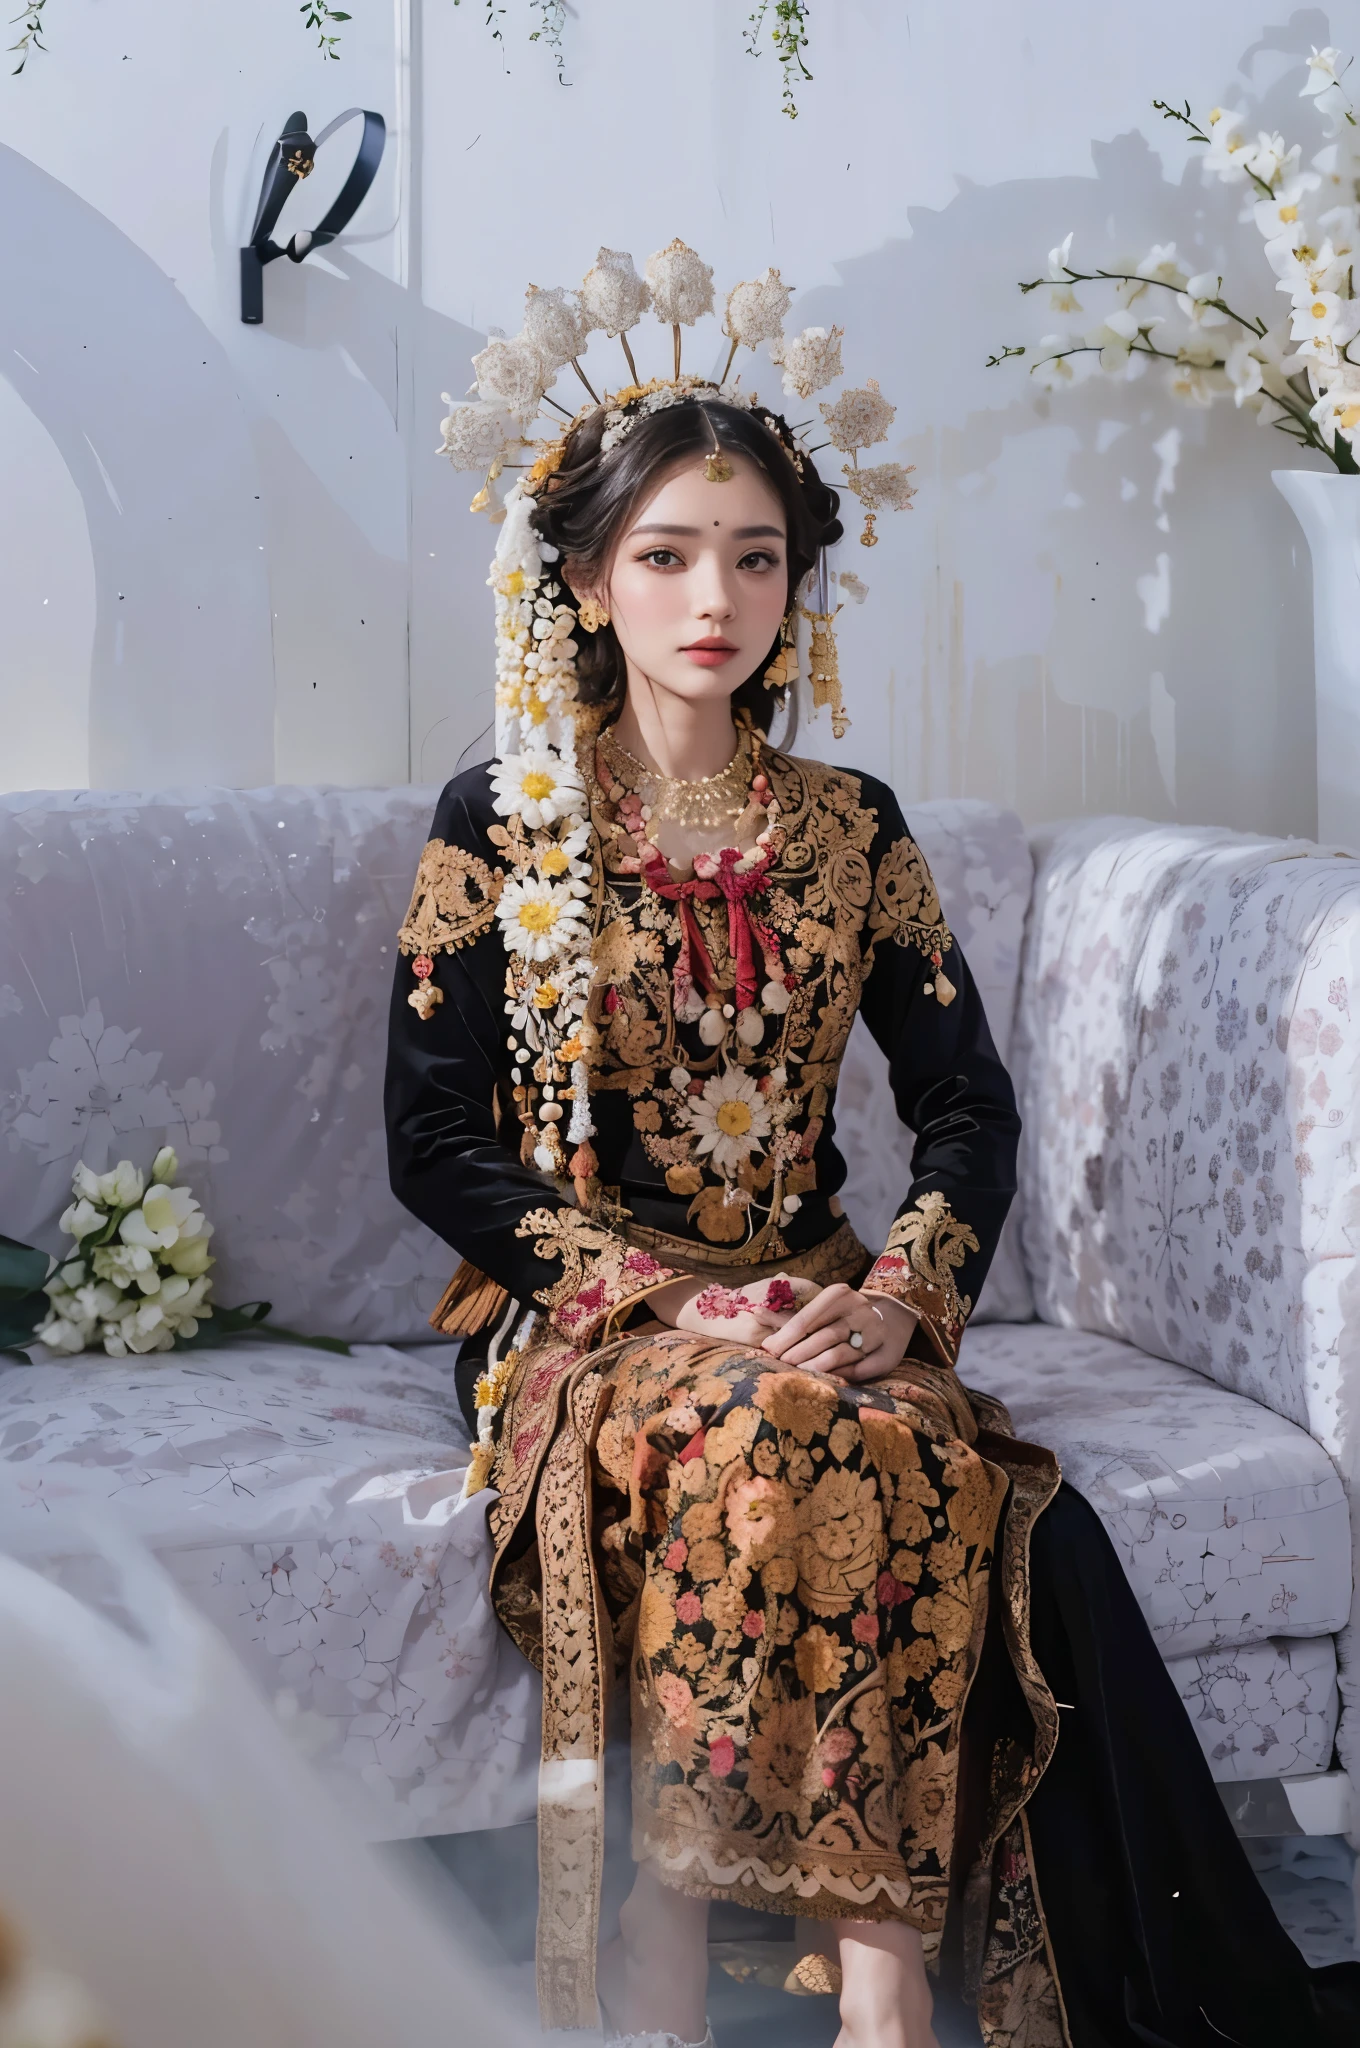 araffe woman in traditional dress sitting on a couch with flowers, traditional dress, traditional clothes, wearing traditional garb, wearing ornate clothing, traditional clothing, bride, traditional beauty, traditional, wearing an ornate outfit, traditional costume, wearing authentic attire, wedding, potrait, comming, protrait, portrait shot, ornate attire, traditional makeup, ornately dressed